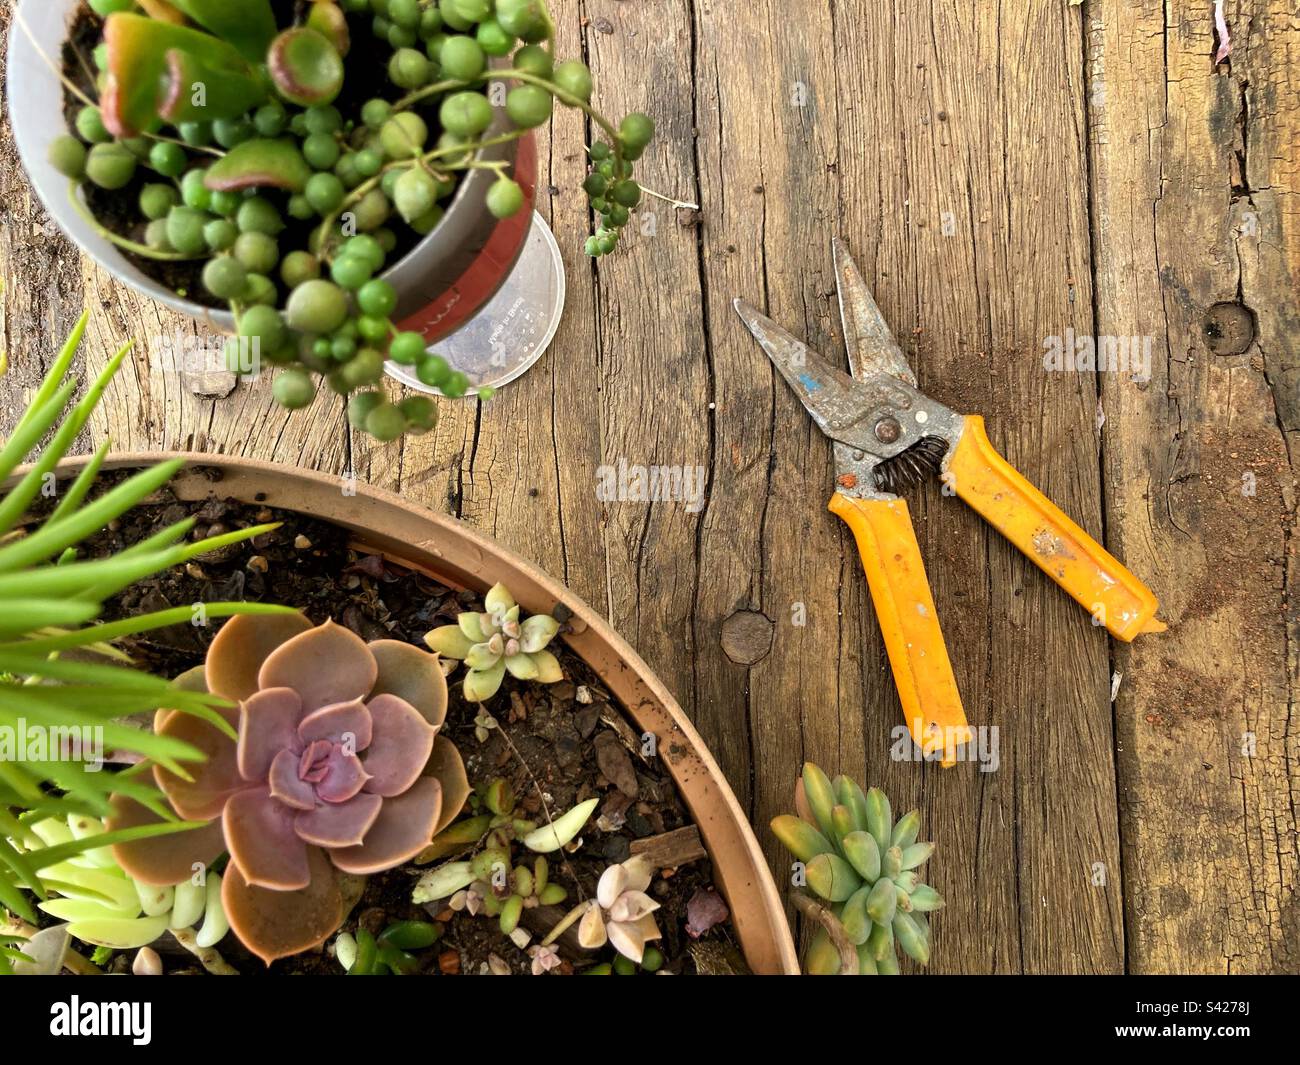 Table of garden works with plants and green flowers and garden tools Stock Photo